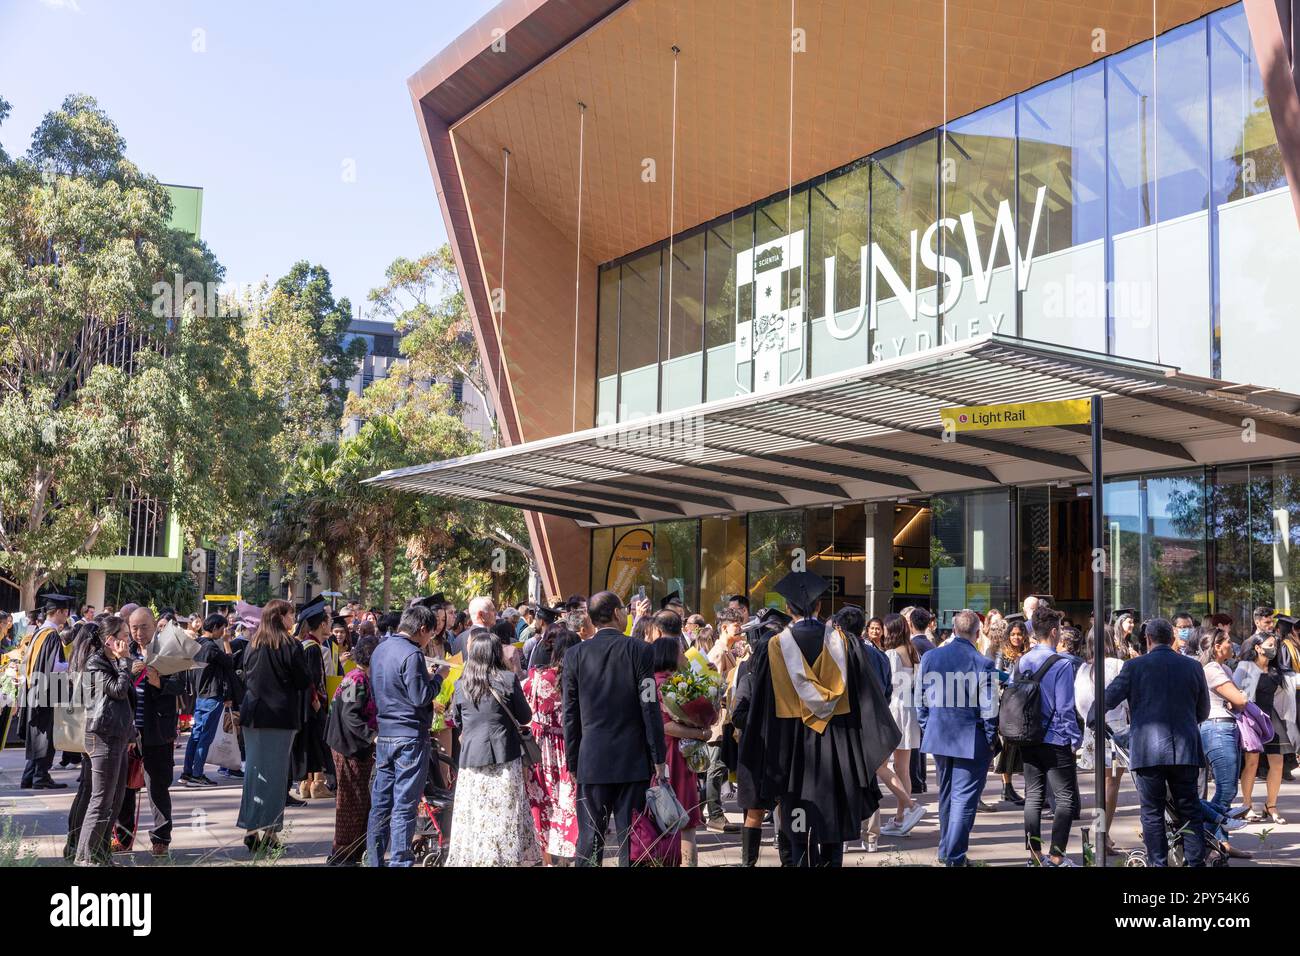 UNSW,University of New South Wales, students and their families at graduation day as students receive their degrees, Sydney,NSW,Australia Stock Photo